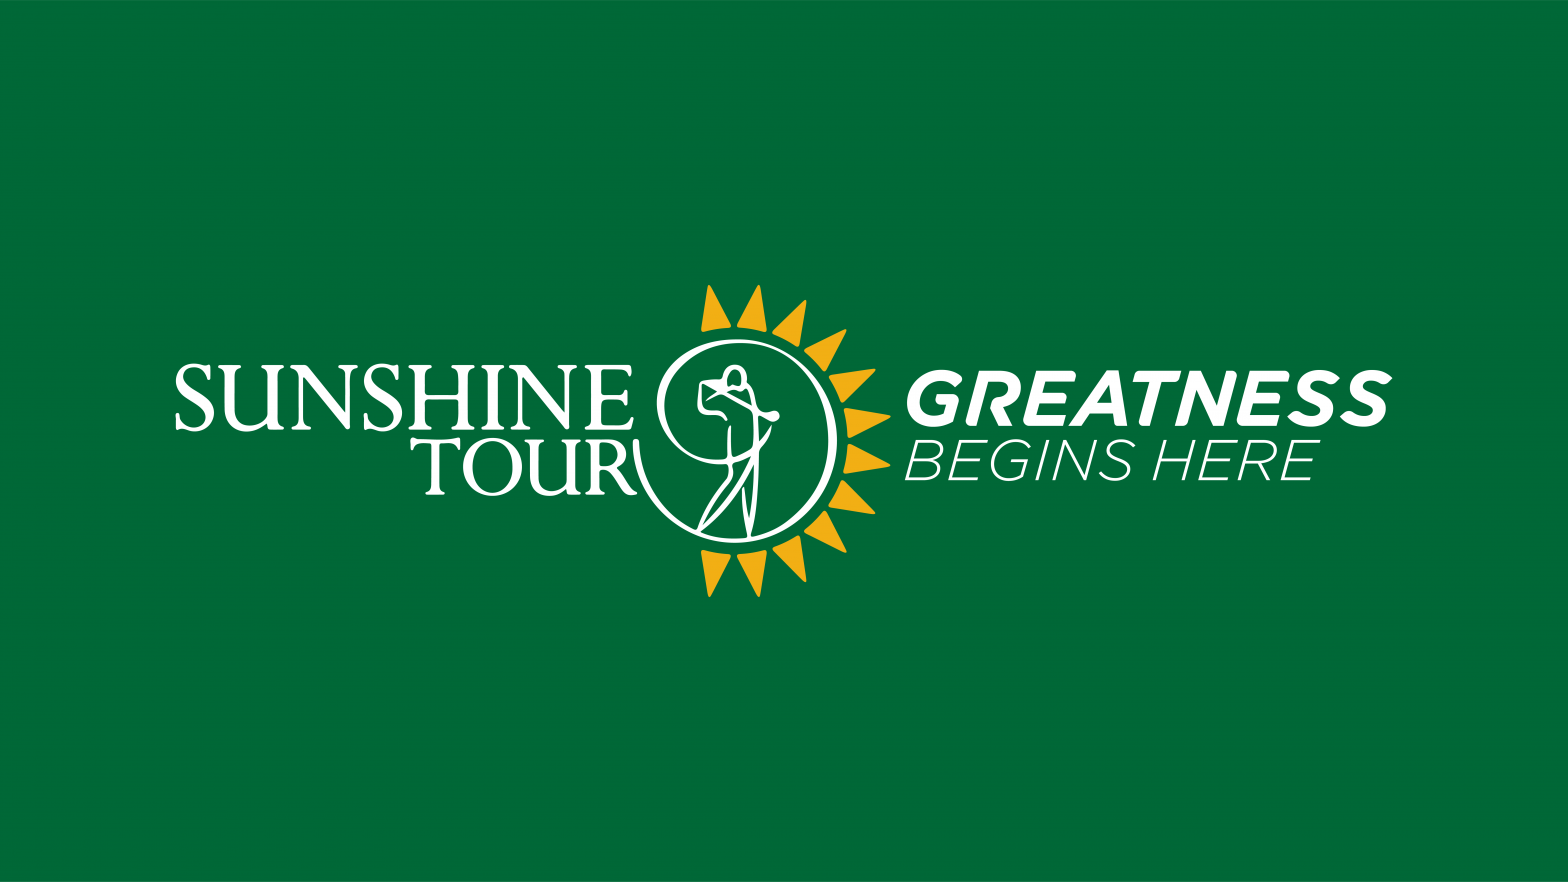 Sunshine Tour welcomes back limited number of fans at tournaments 1